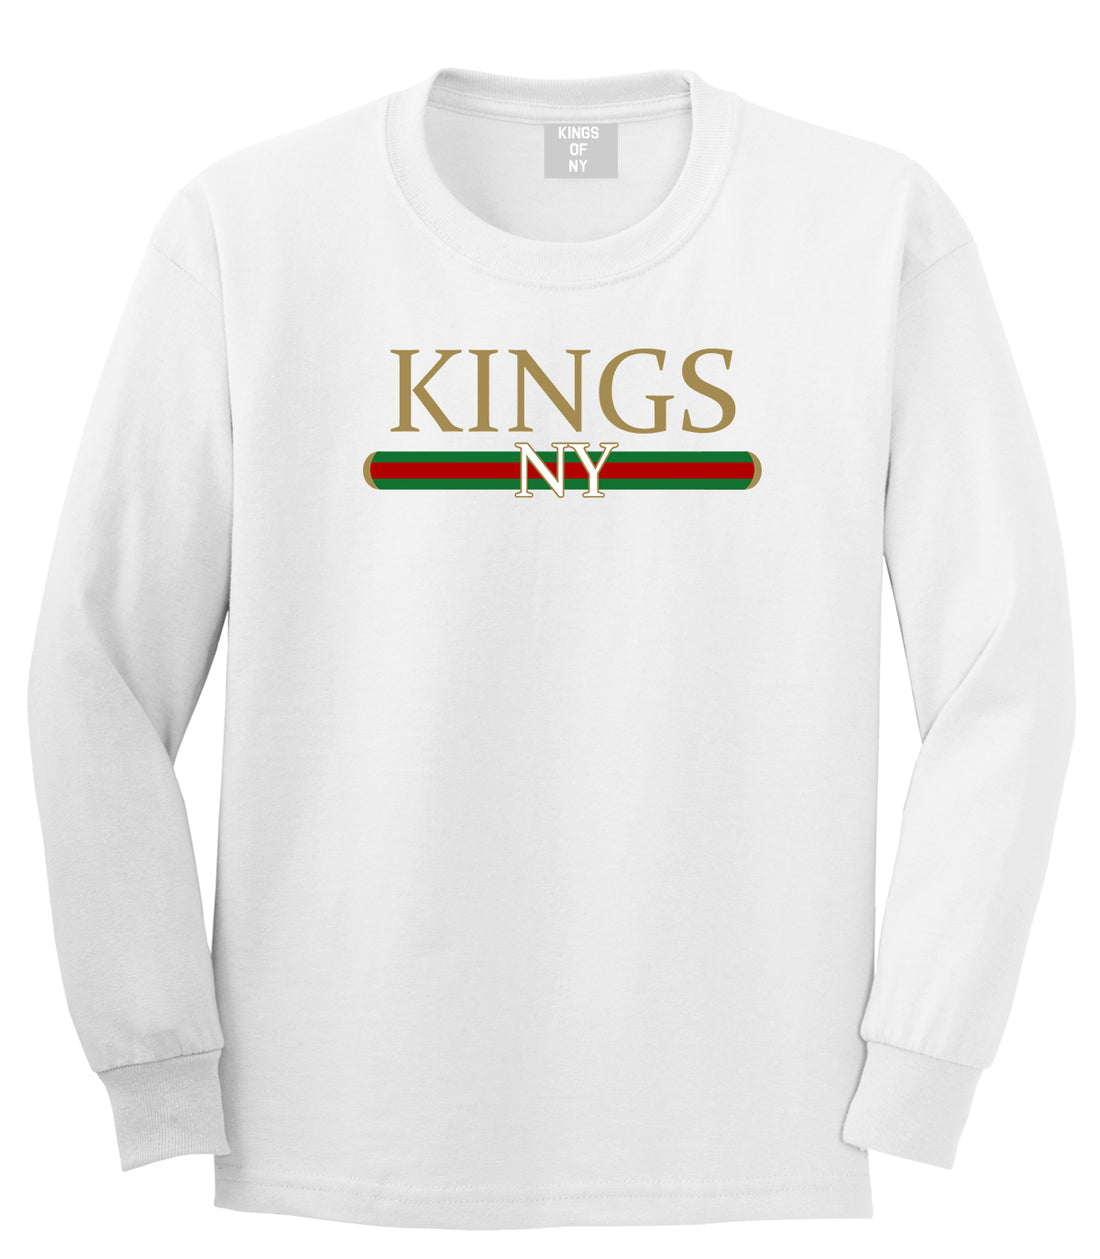 Vintage High Fashion Long Sleeve T-Shirt in White